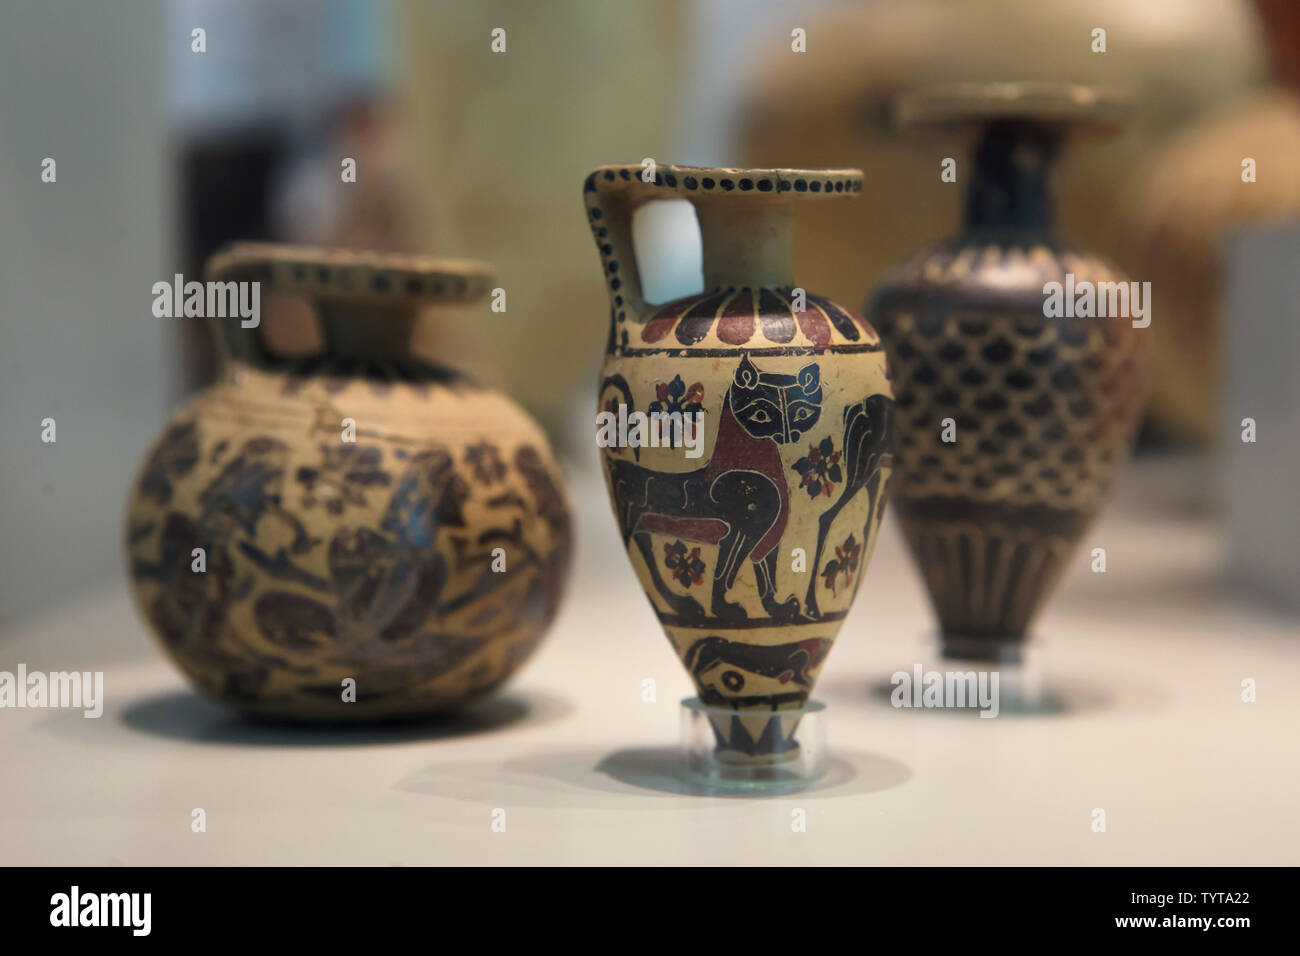 Ancient pottery decorated with Corinthian vase painting dated from around 700 BC on display in the Altes Museum in Berlin, Germany. Stock Photo